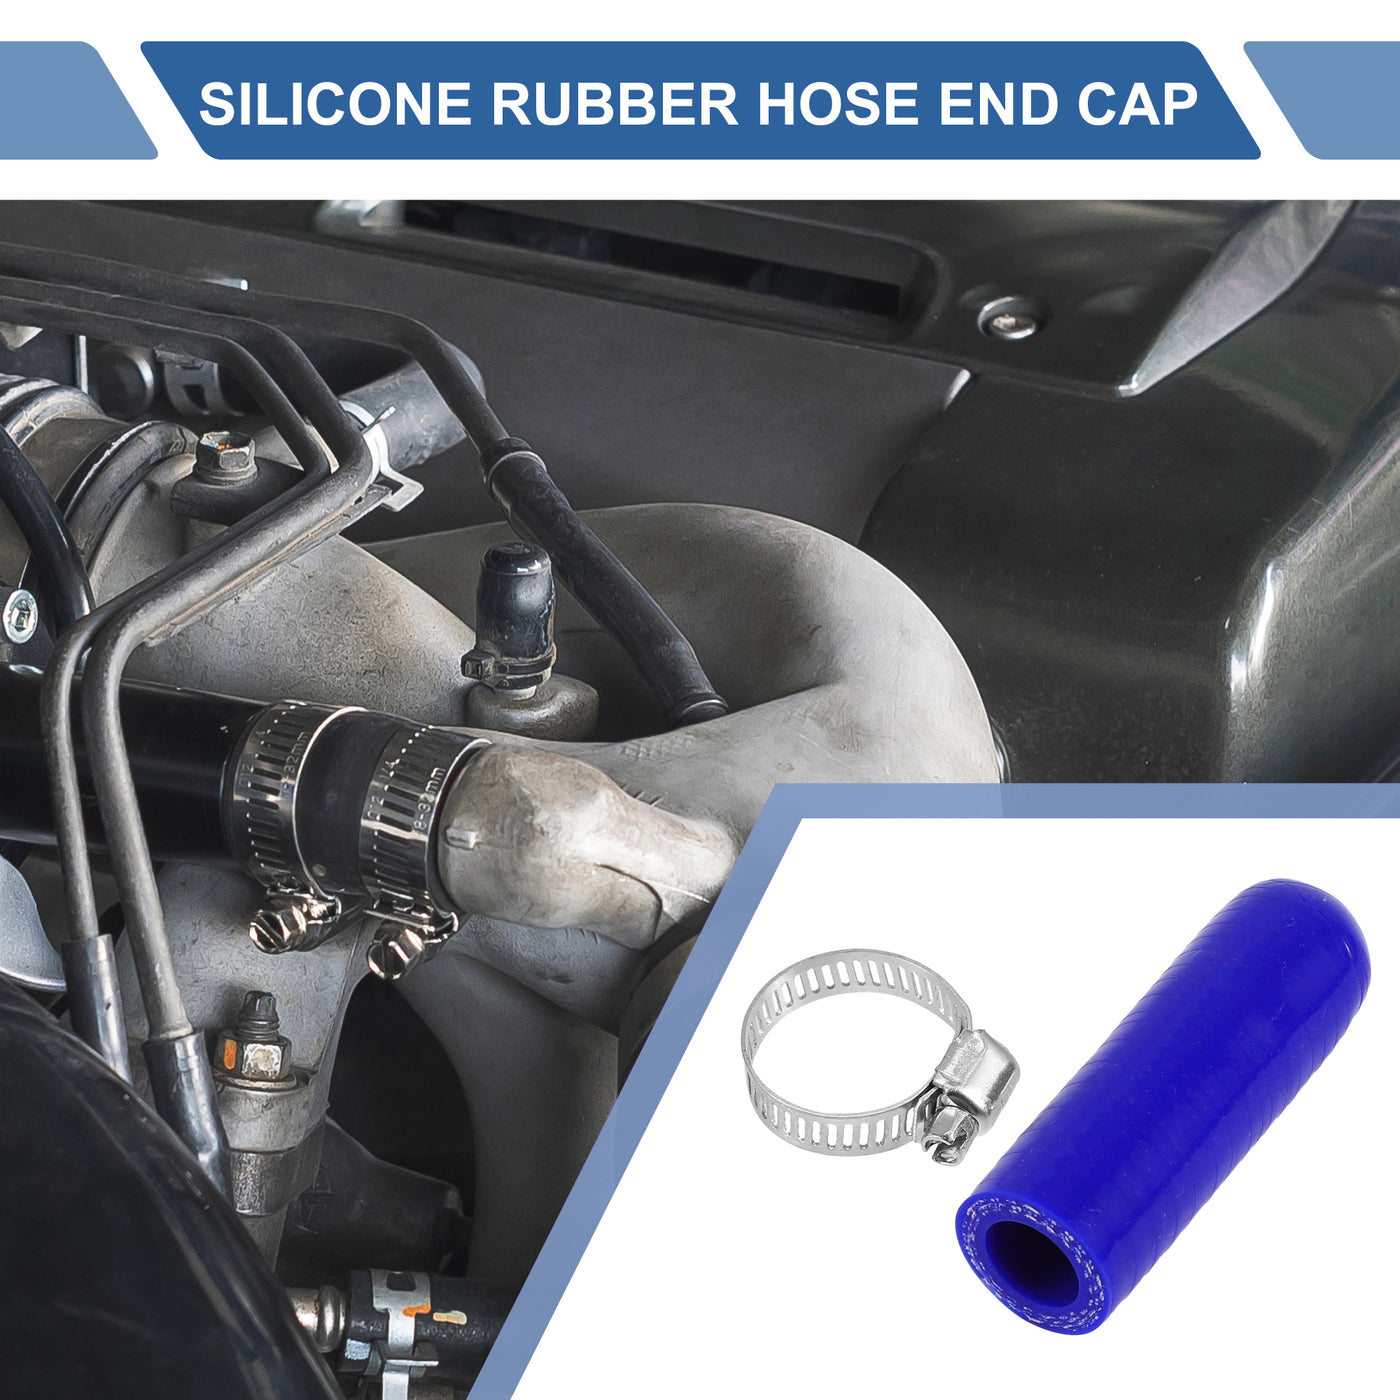 X AUTOHAUX 1 Pcs 60mm Length 14mm/0.55" ID Blue Car Silicone Rubber Hose End Cap with Clamp Silicone Reinforced Blanking Cap for Bypass Tube Universal